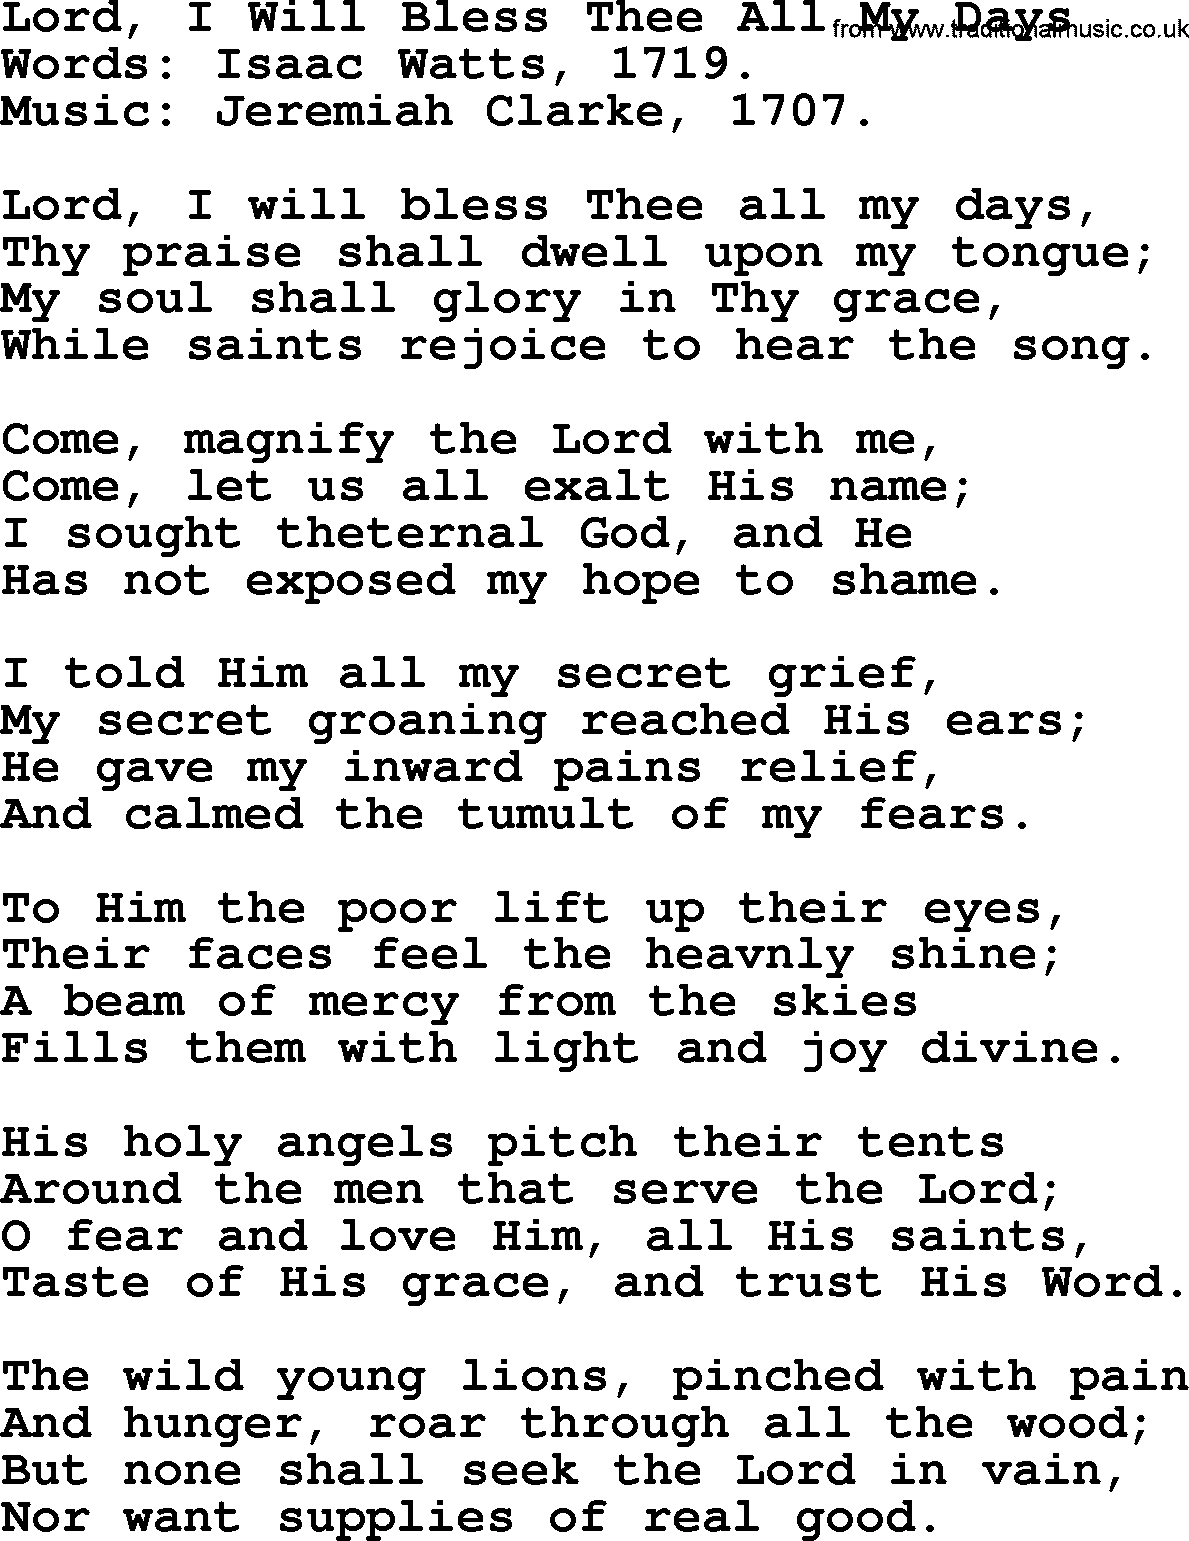 Isaac Watts Christian hymn: Lord, I Will Bless Thee All My Days- lyricss